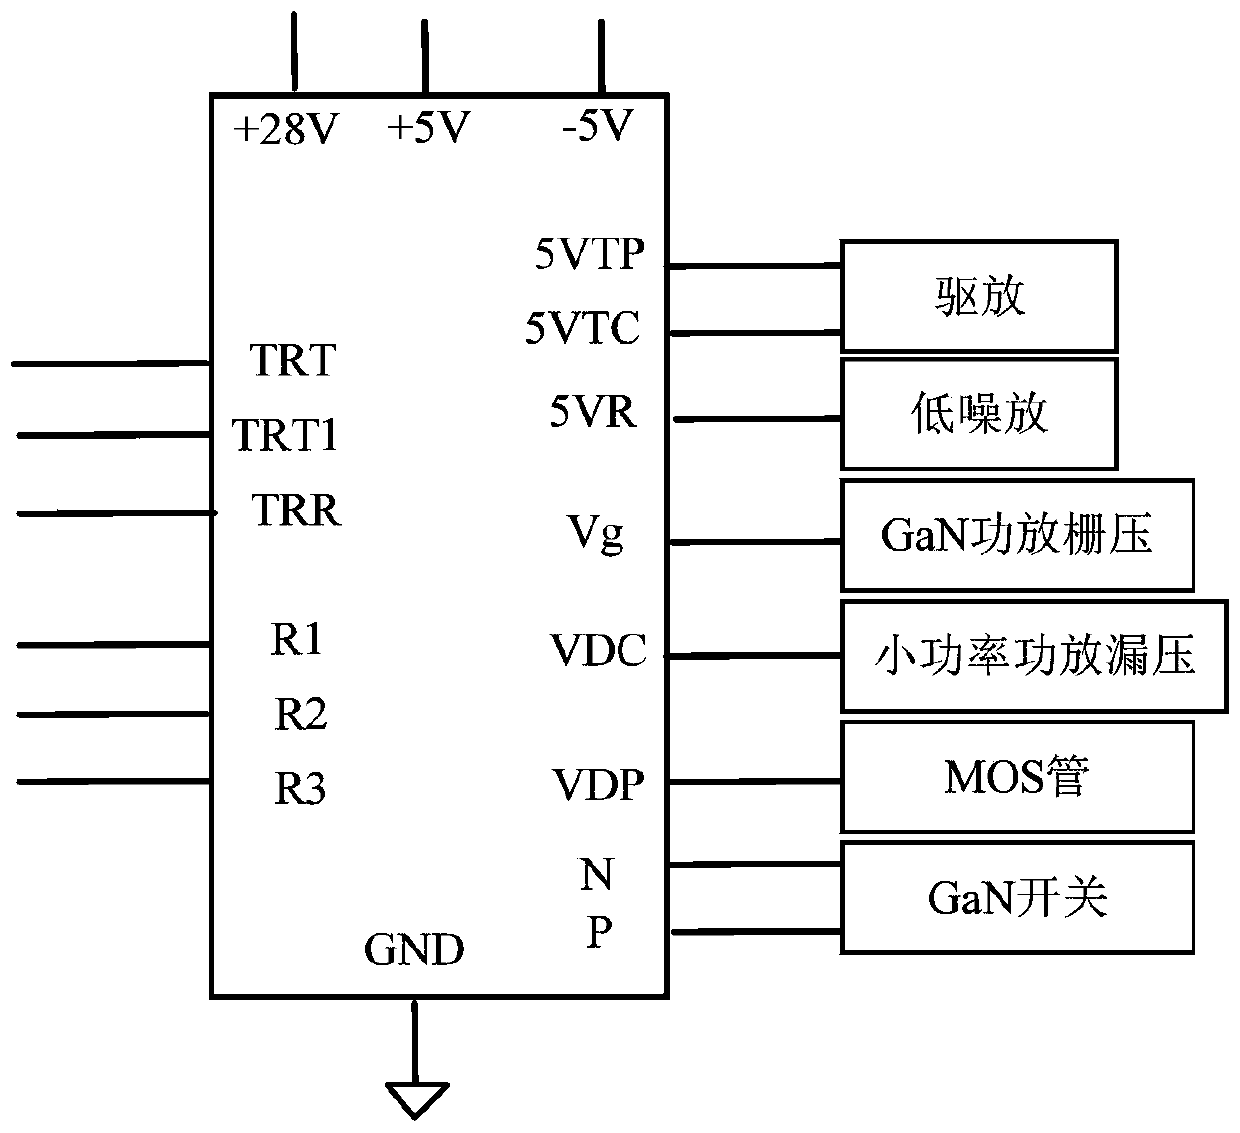 X wave band T/R assembly with switchable output power